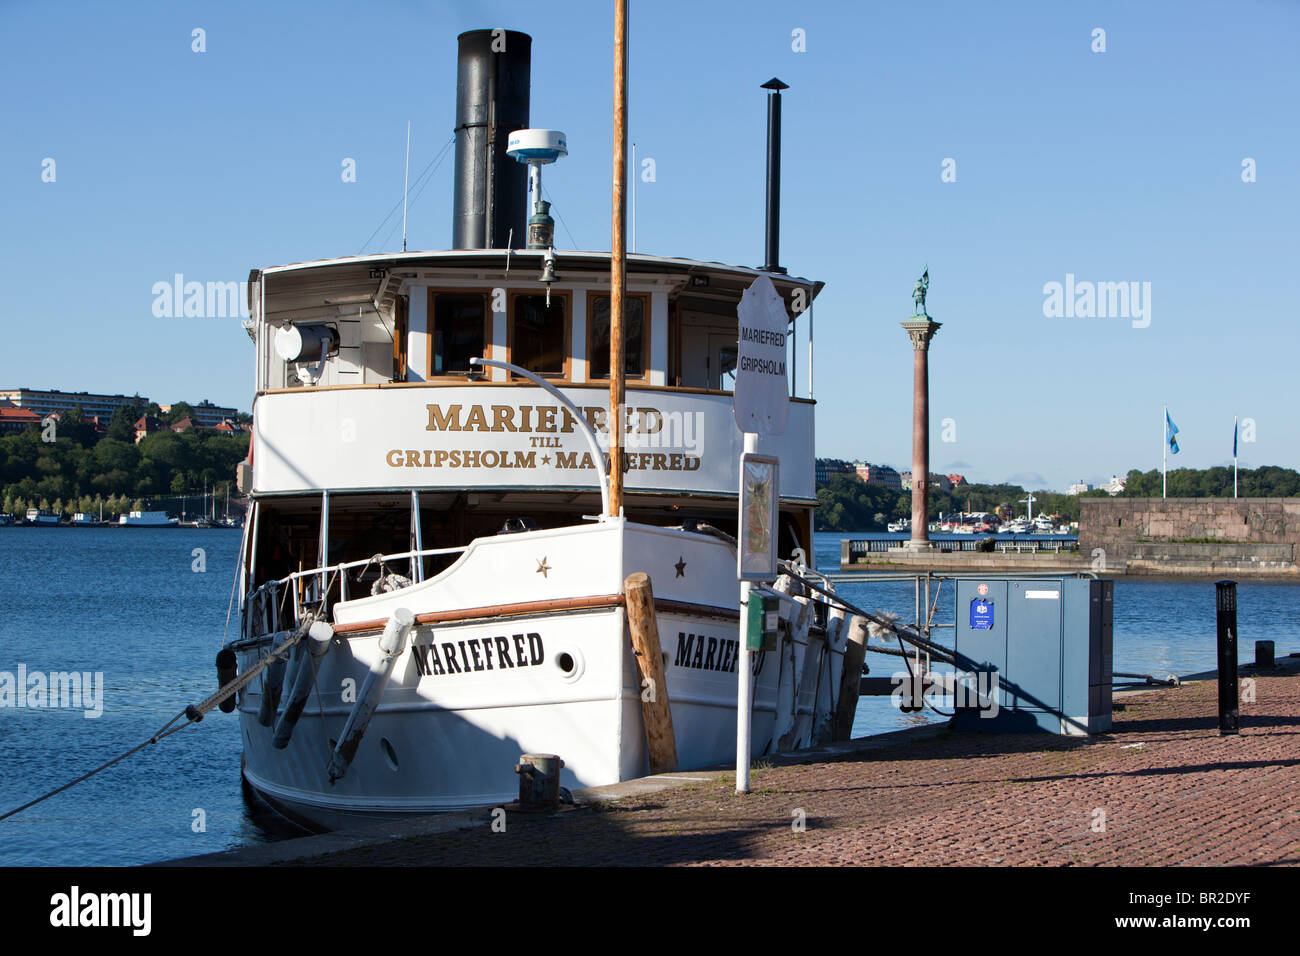 Steamship to Mariefred docked at Kungsholmen in Stockholm Stock Photo